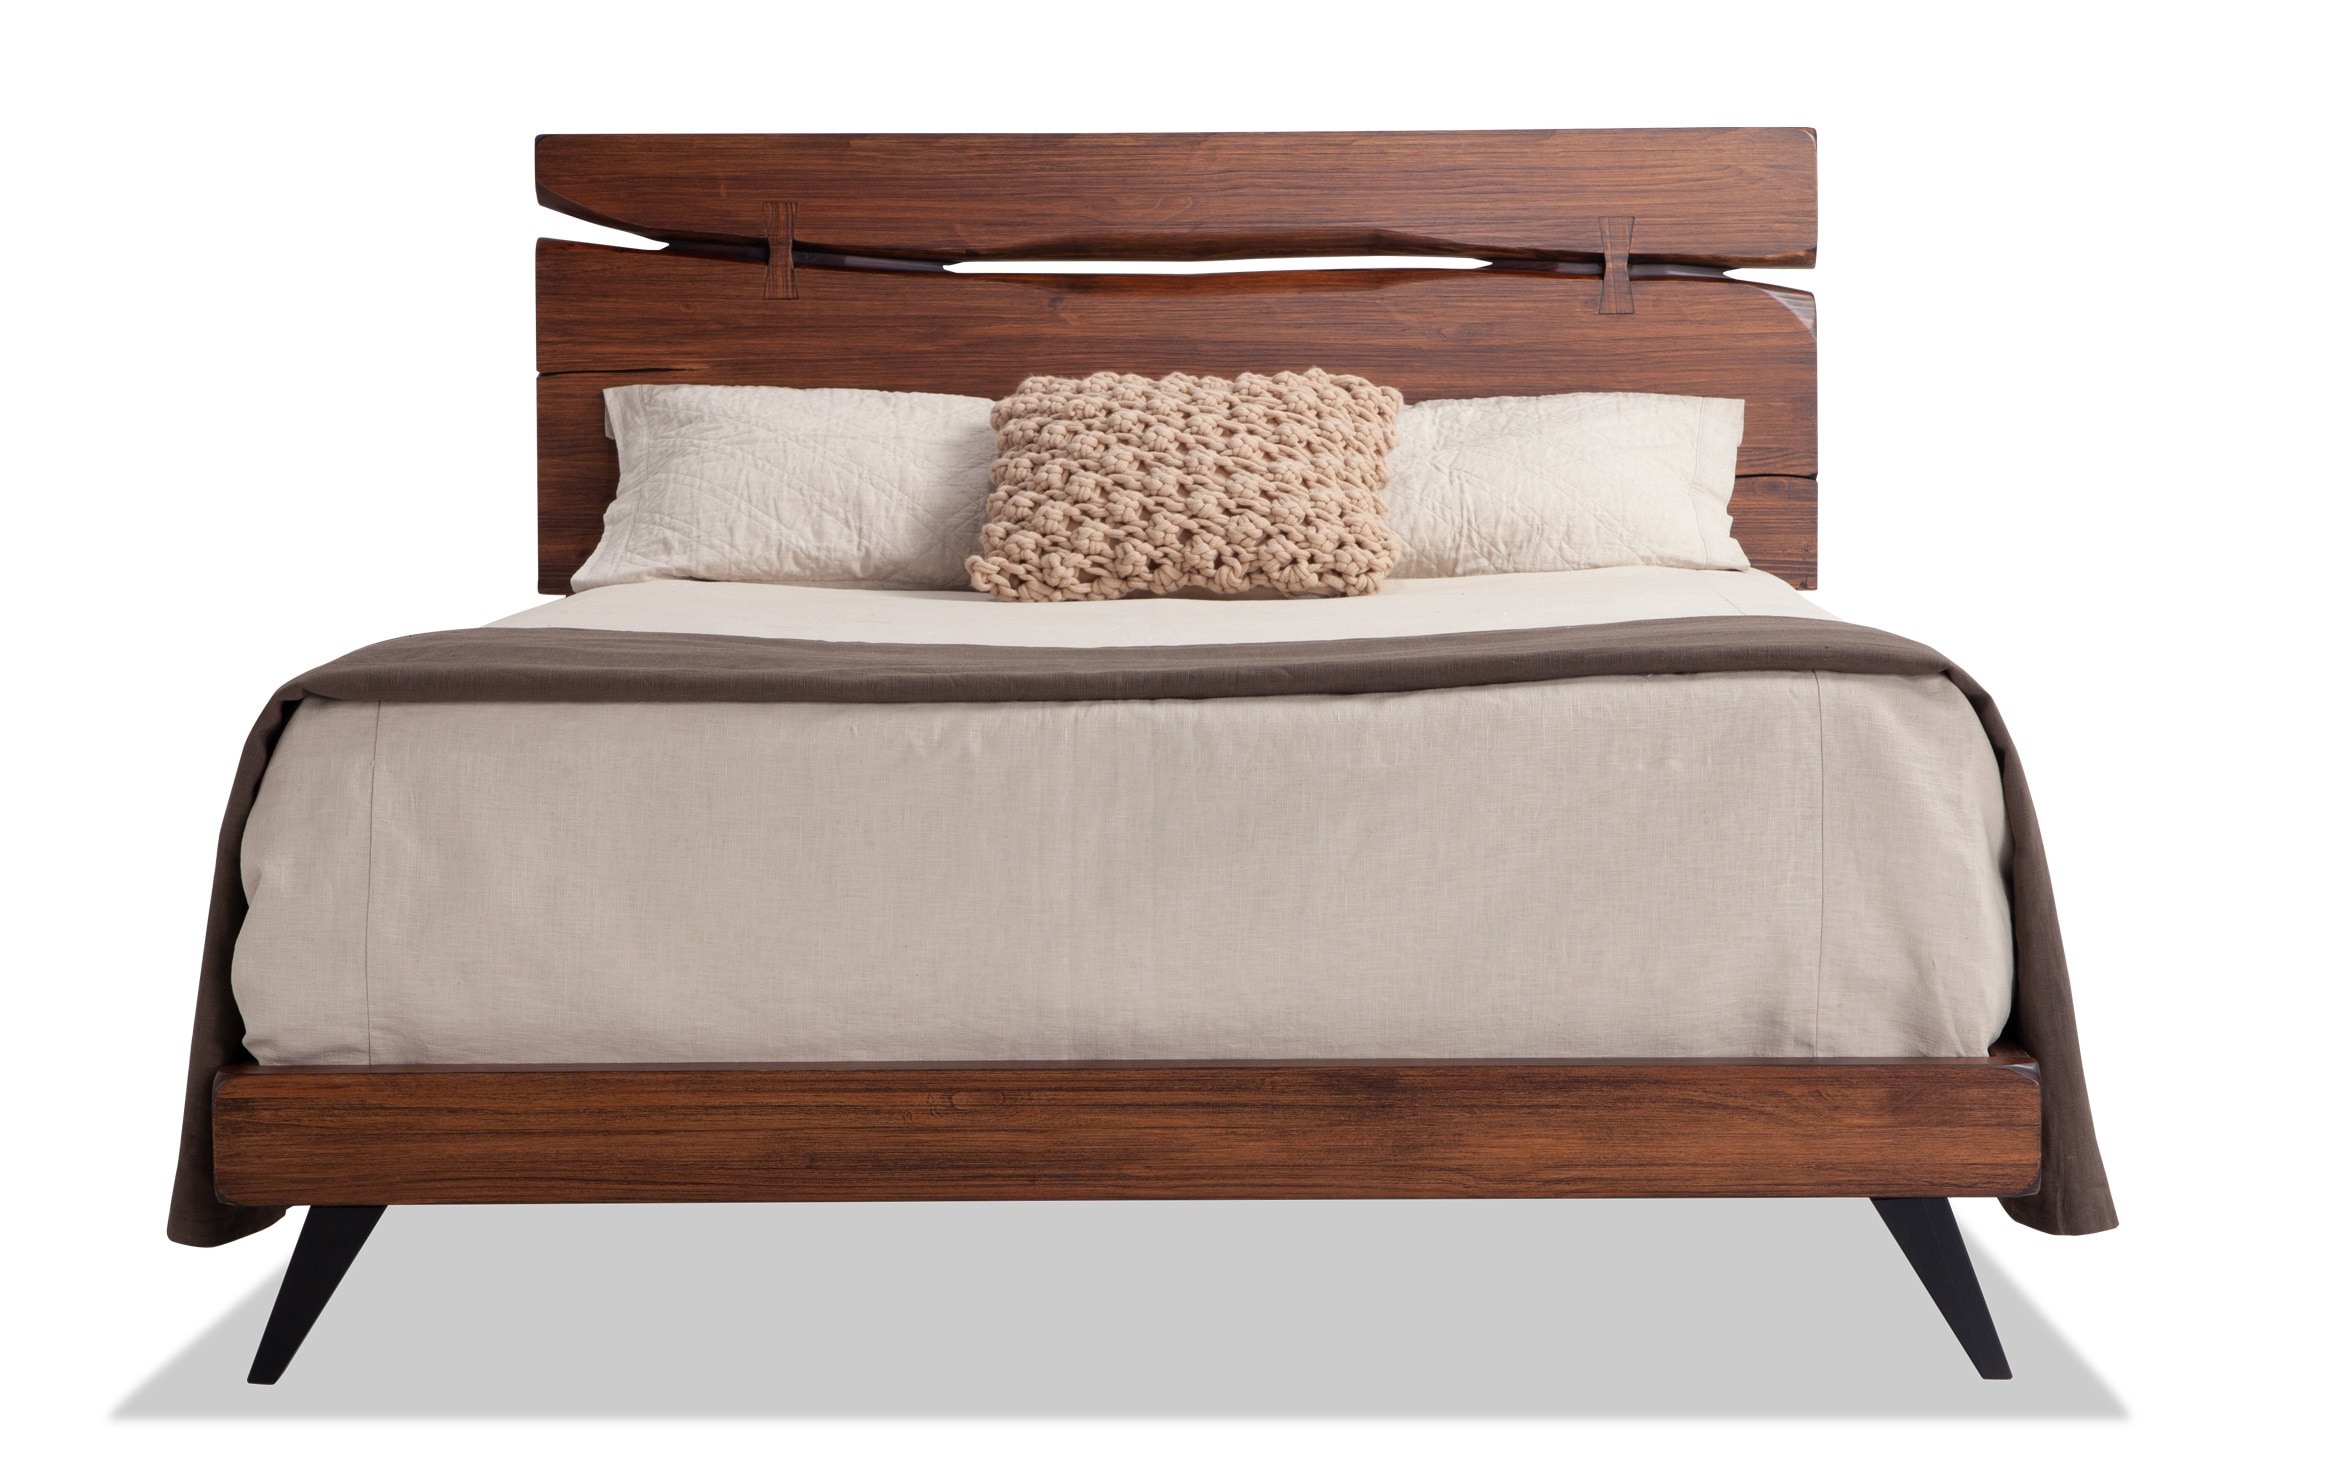 Canyon Queen Bed Bob S Furniture, Brown Wood Bed Frame